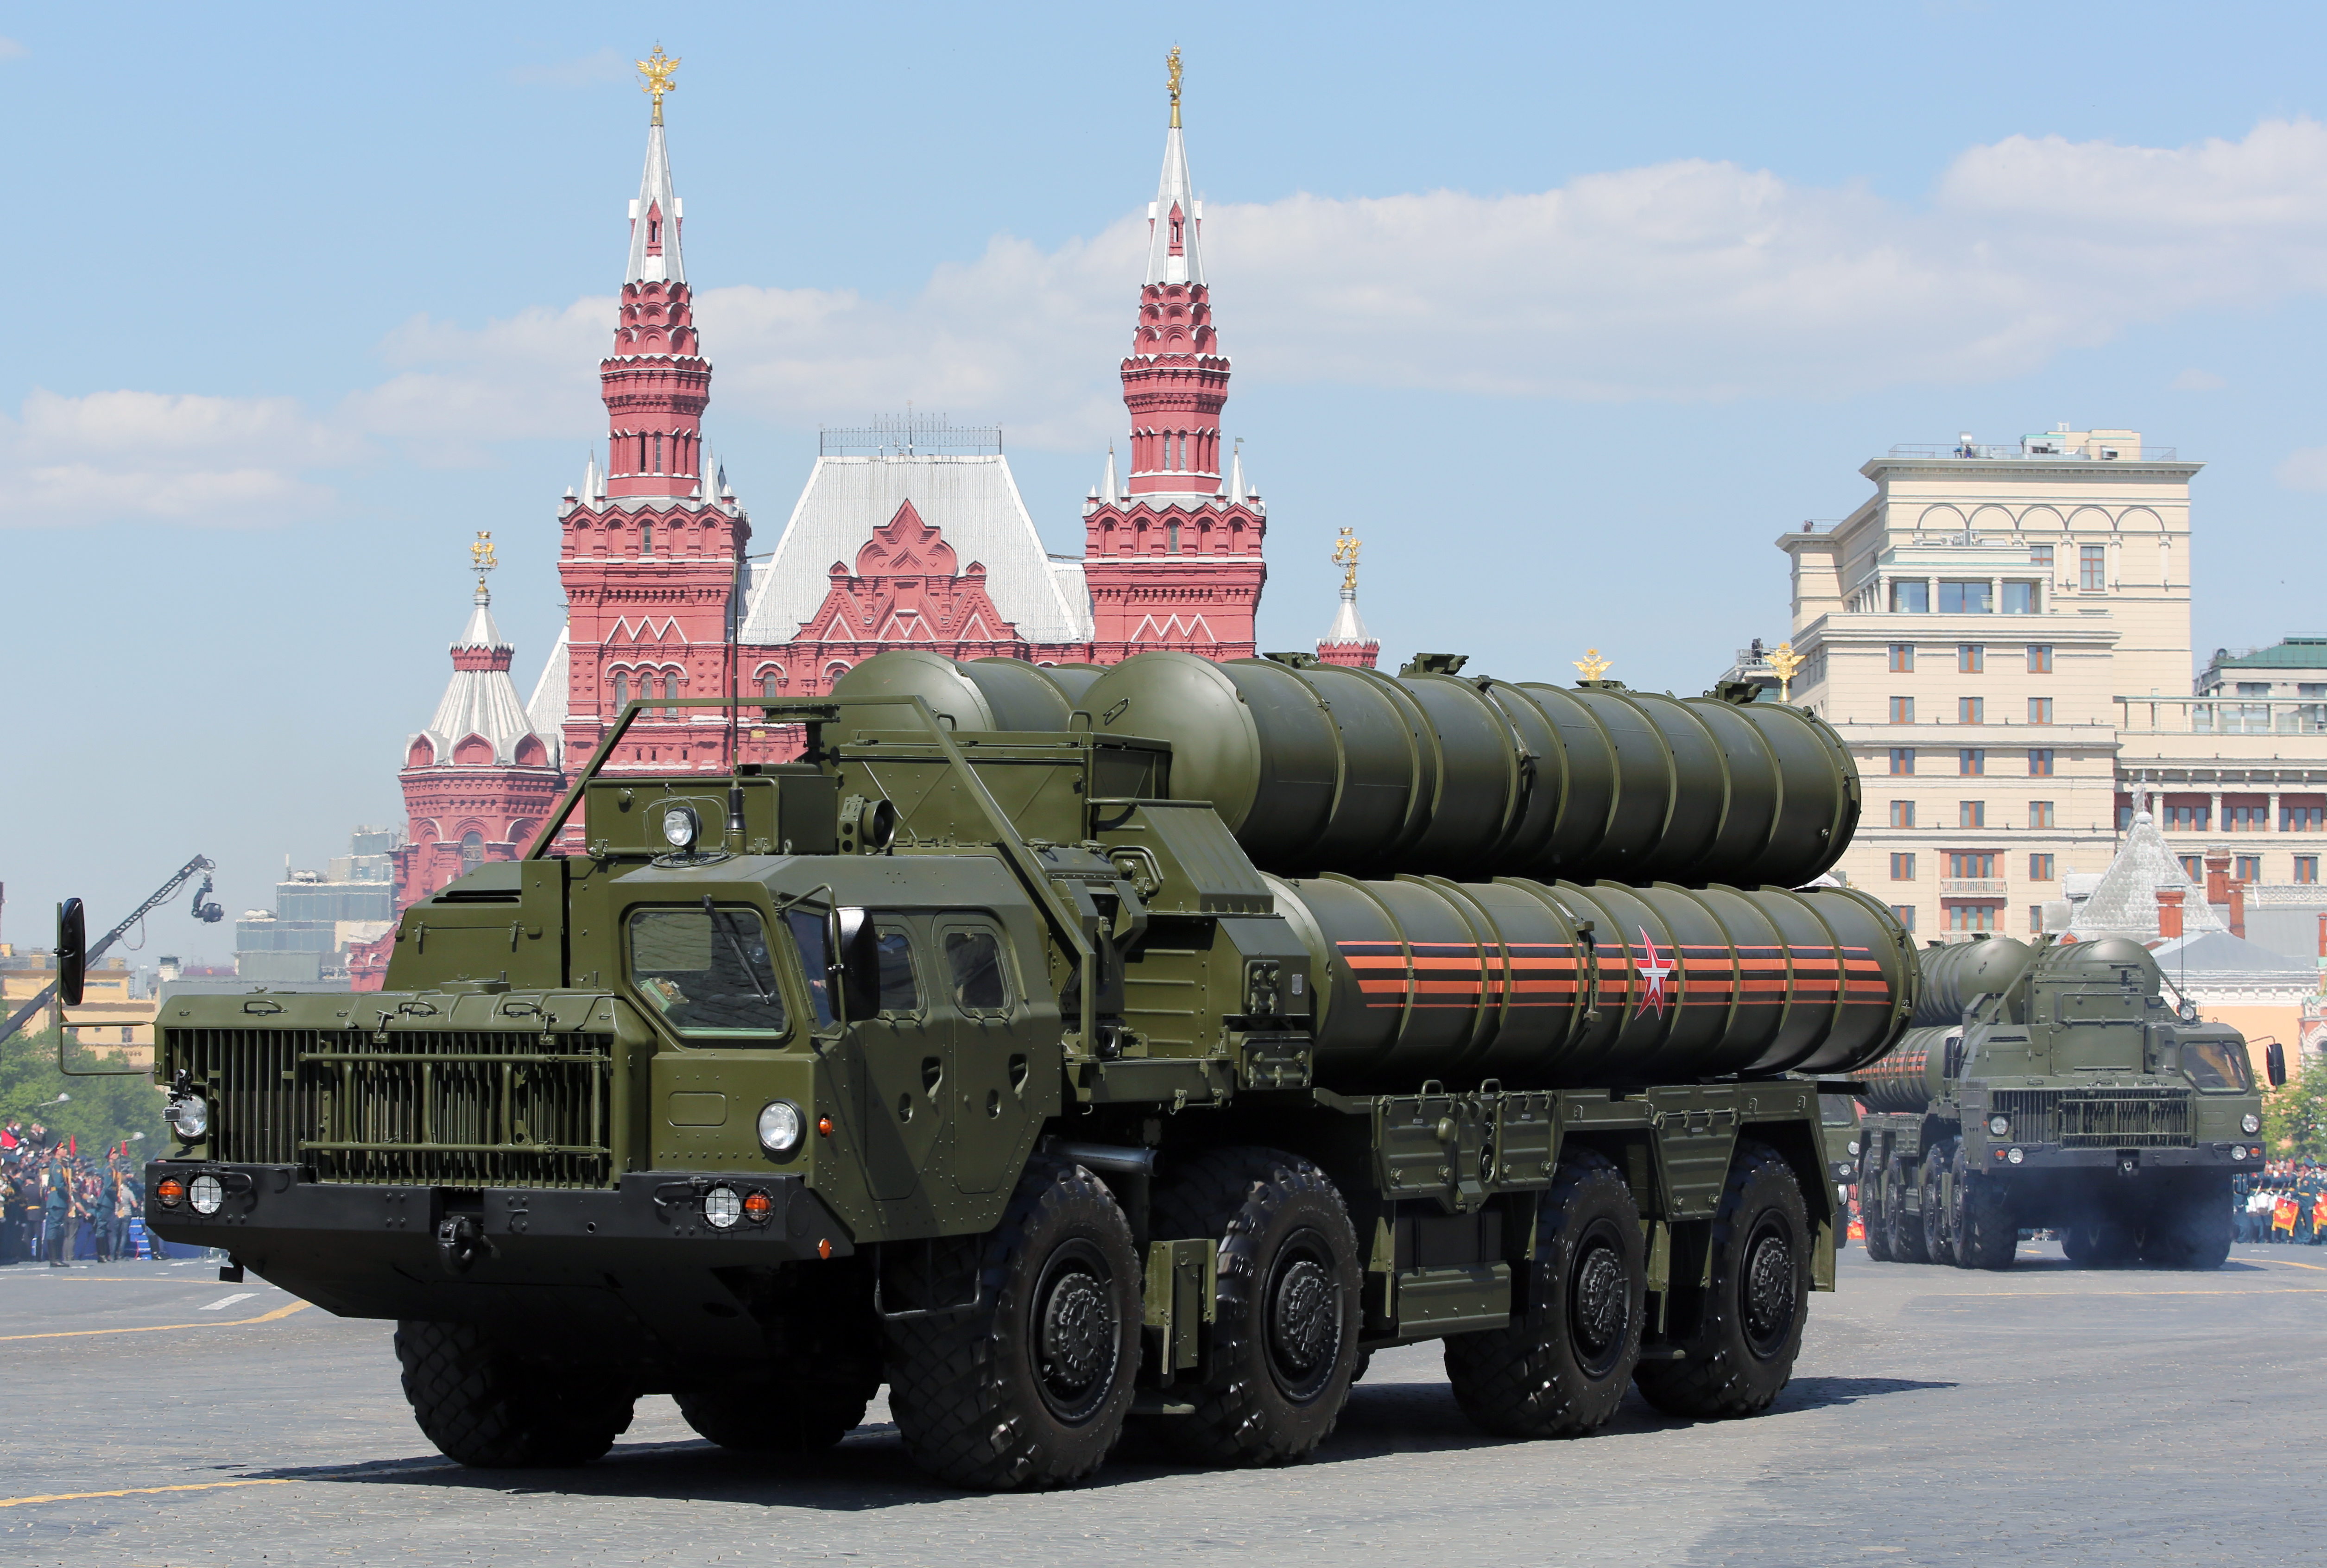 An S-400 Triumf surface-to-air launch vehicle rolls down Moscow's Red Square during a Victory Day military parade marking the 71st anniversary of the Victory over Nazi Germany in World War II. 